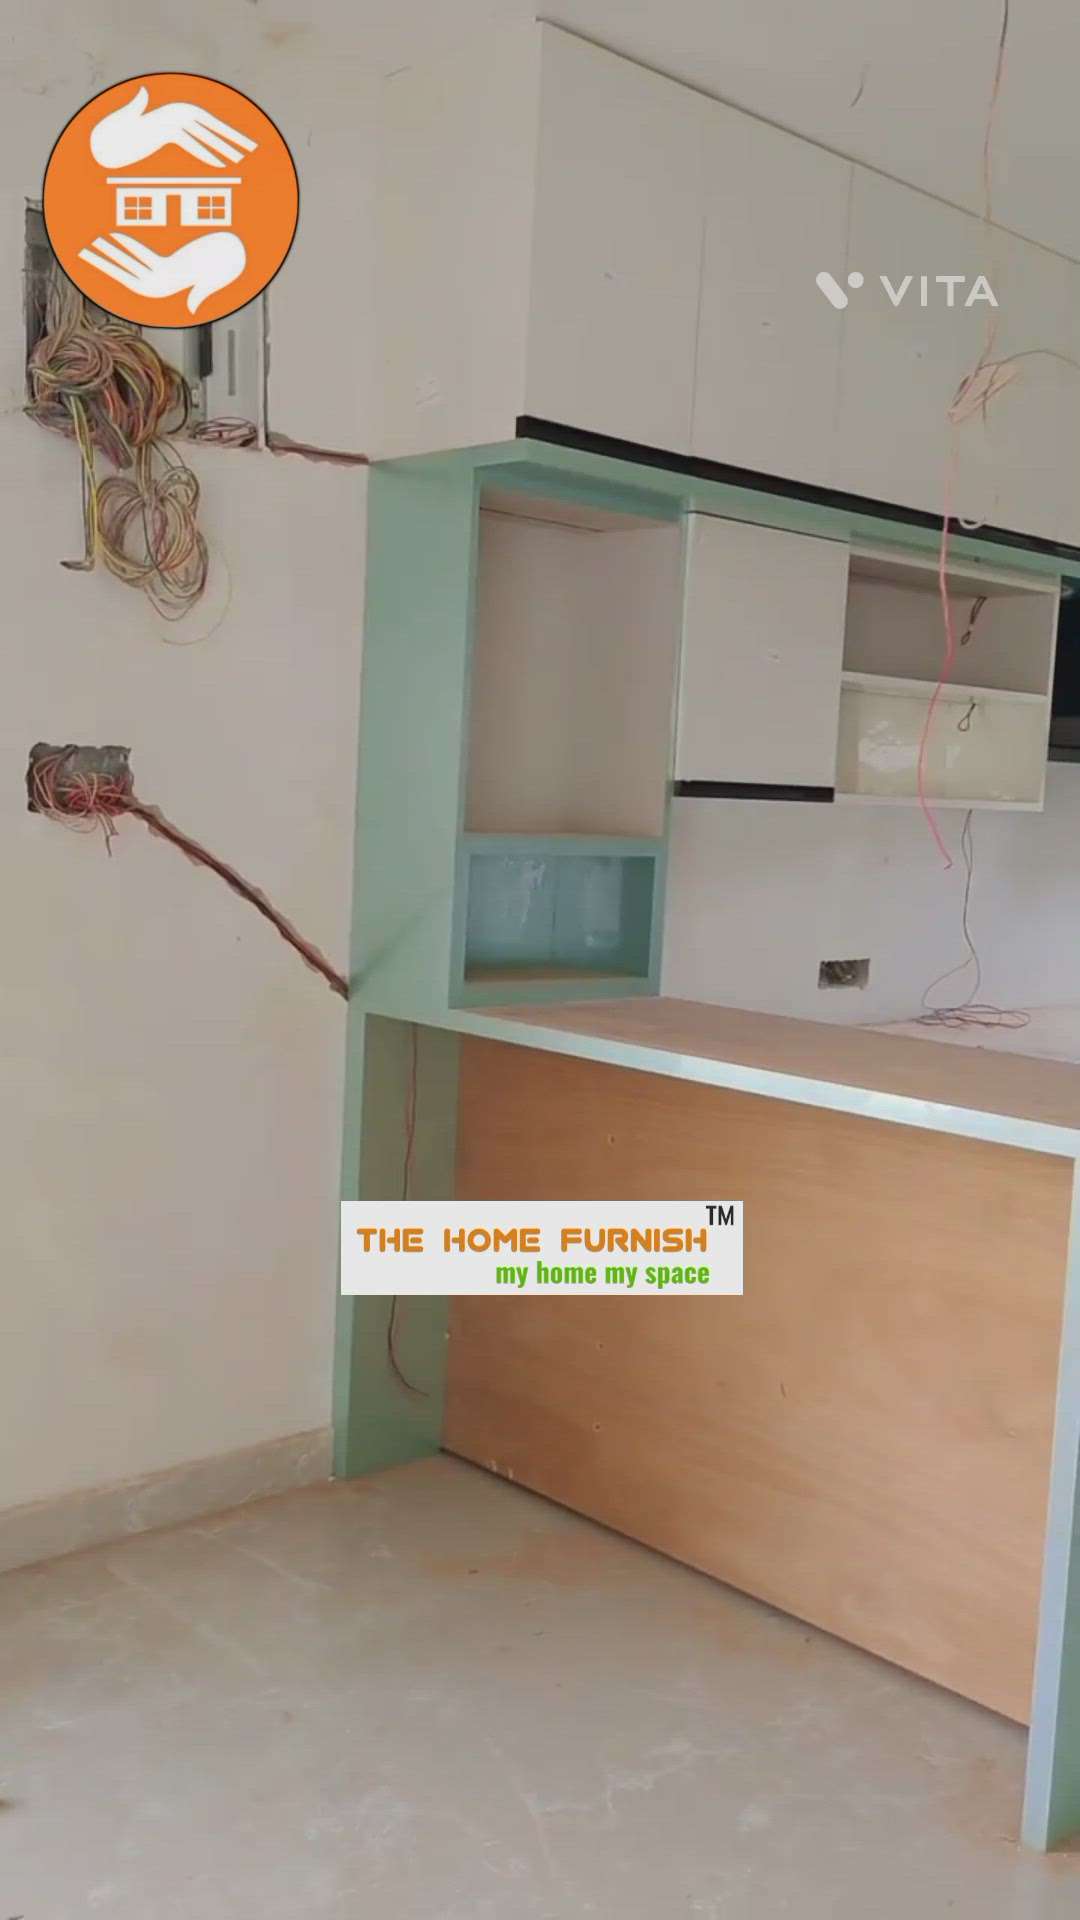 THE HOME FURNISH
Next Generation Kitchen! Italian Kitchen in Indian Style...Exclusive collection of Modular Kitchen designs at THE HOME FURNISH.  Explore the latest modular kitchen designs & consultations. Inquiry Please Contact! https://wa.me/c/917018317671
#kitchen #modularkitchen #chimney #kitchendesign #kitcheninteriordesign #kitchendesignideas  #interiordesigner #interiordesigner #interiordecorating #interiordesign #interiors #architecture #architecturedesign